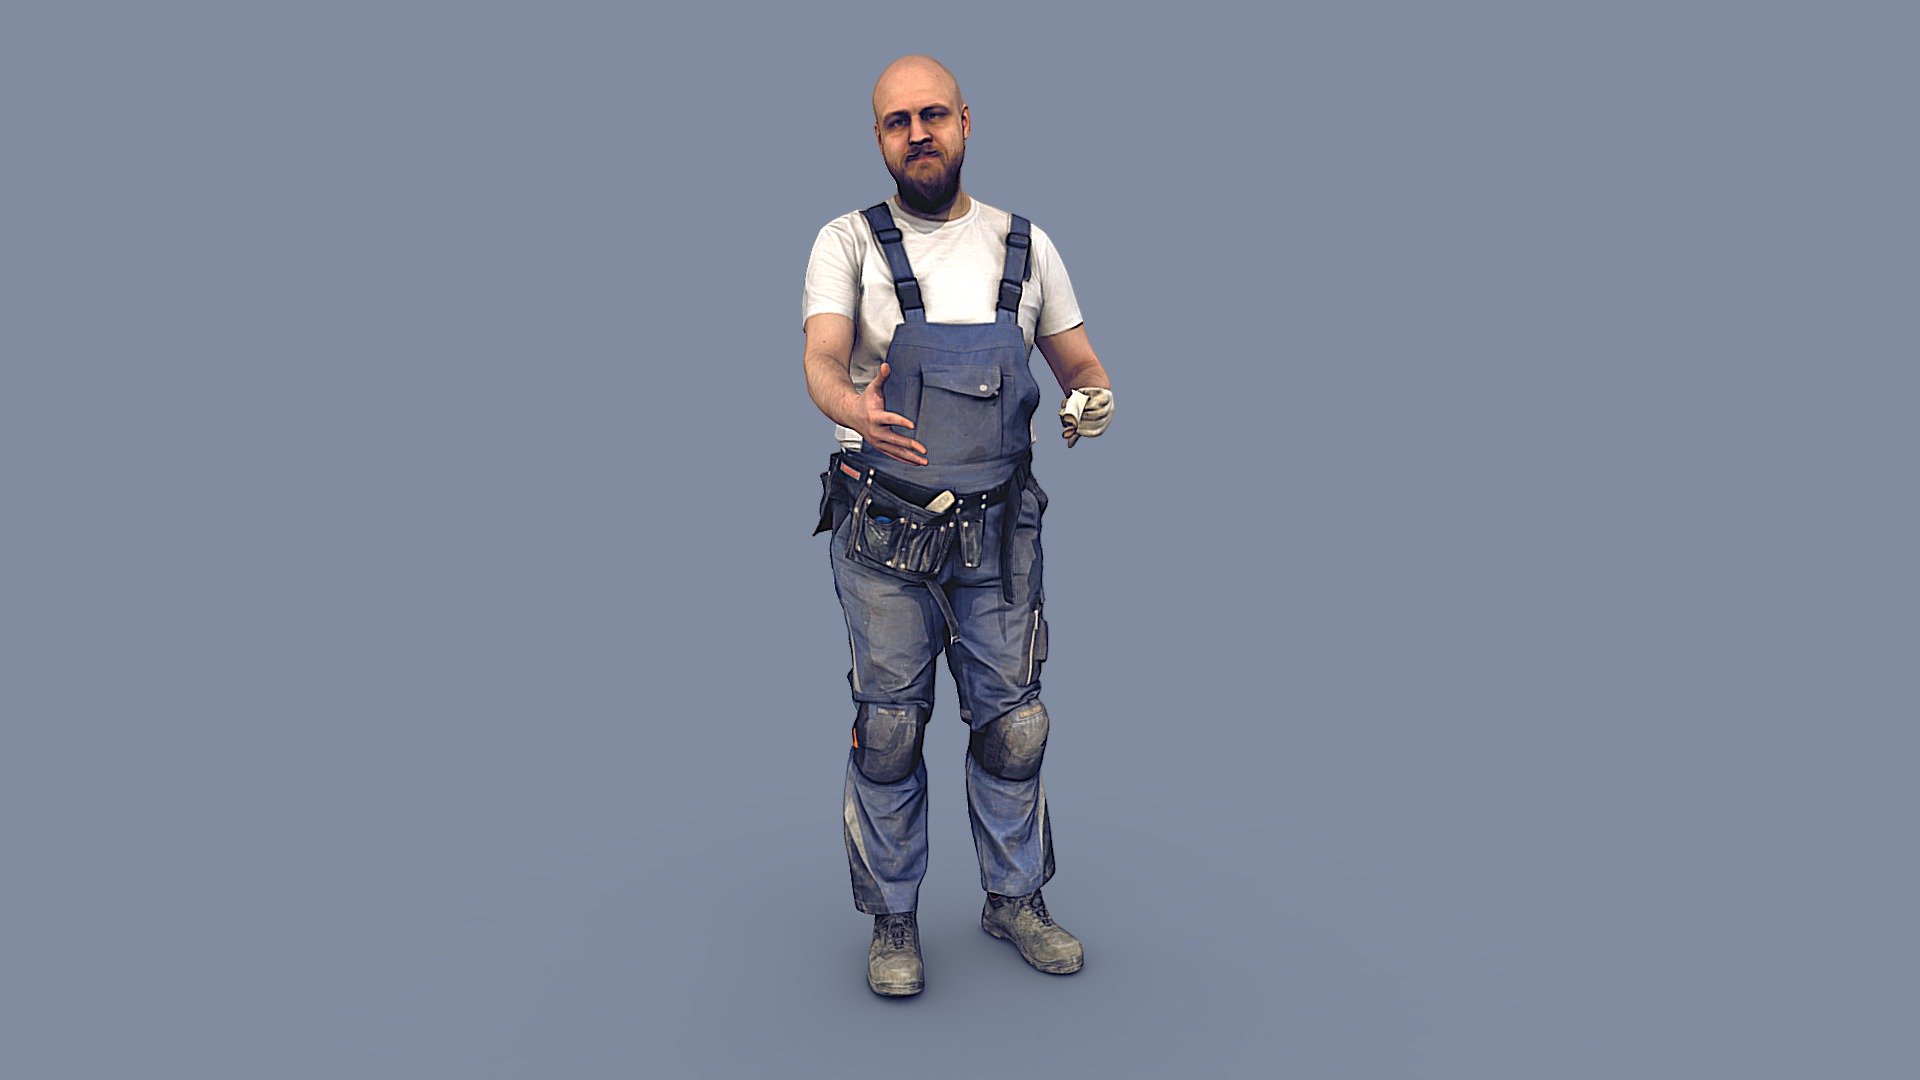 ✉️ A young man, a bald guy with a beard, a builder, a worker, in a work uniform, overalls, gloves, with a construction belt bag, standing, hand shaking.

🦾 This model will be an excellent mid-range participant. It does not need to be very close and try to see the details, it reveals and demonstrates its texture as much as possible in case of a certain distance from the foreground.

⚙️ Photorealistic Construction Worker Character 3d model ready for Virtual Reality (VR), Augmented Reality (AR), games and other real-time apps. 
Suitable for the architectural visualization and another graphical projects. 
50 000 polygons per model 3d model